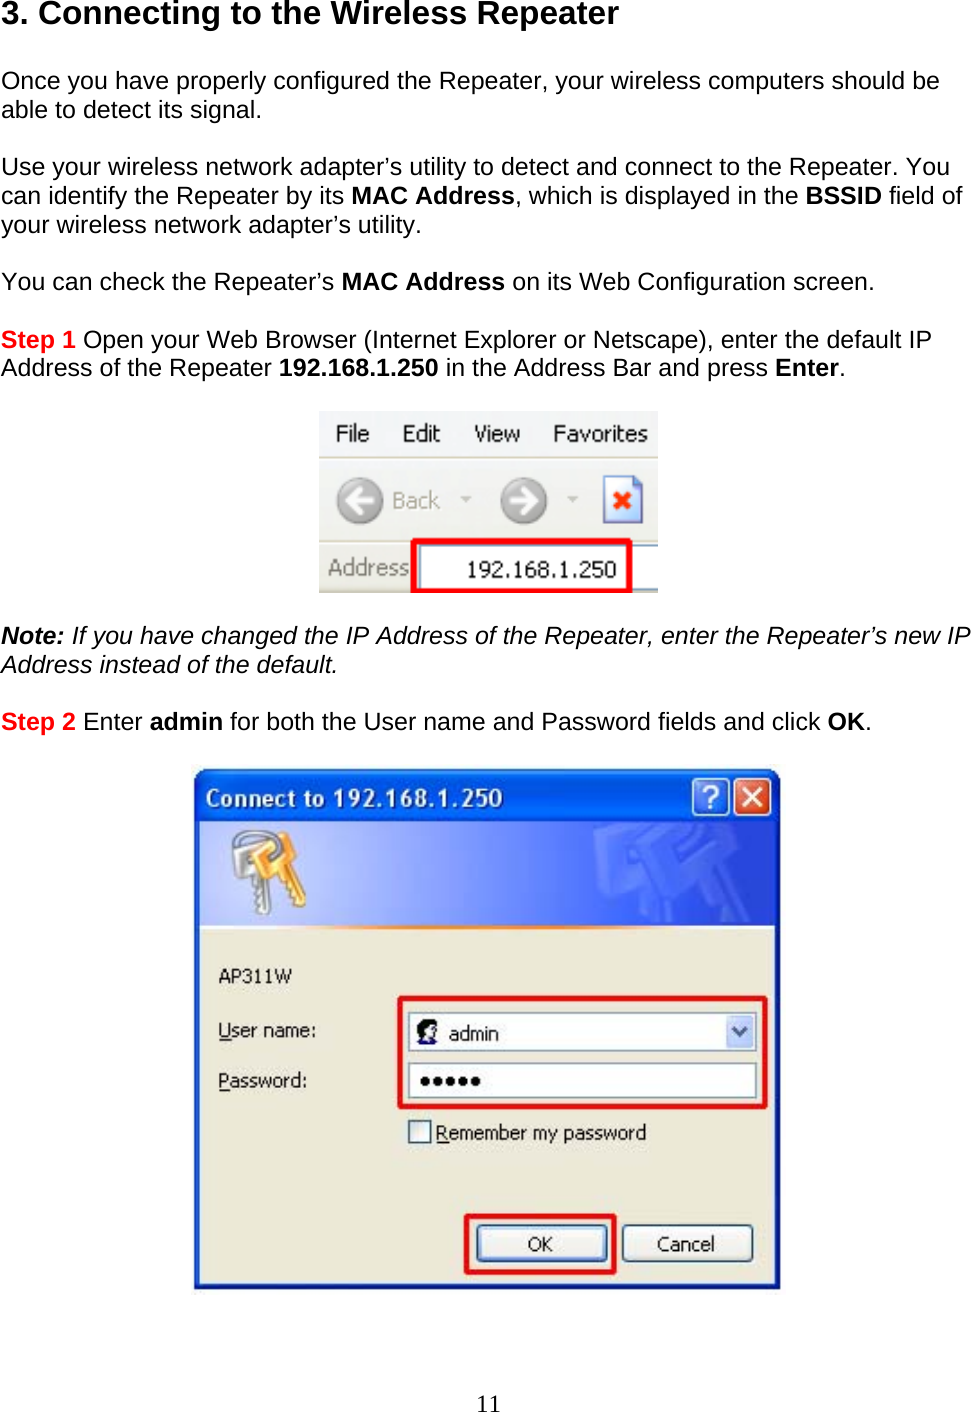 11 3. Connecting to the Wireless Repeater  Once you have properly configured the Repeater, your wireless computers should be able to detect its signal.  Use your wireless network adapter’s utility to detect and connect to the Repeater. You can identify the Repeater by its MAC Address, which is displayed in the BSSID field of your wireless network adapter’s utility.  You can check the Repeater’s MAC Address on its Web Configuration screen.  Step 1 Open your Web Browser (Internet Explorer or Netscape), enter the default IP Address of the Repeater 192.168.1.250 in the Address Bar and press Enter.    Note: If you have changed the IP Address of the Repeater, enter the Repeater’s new IP Address instead of the default.  Step 2 Enter admin for both the User name and Password fields and click OK.    